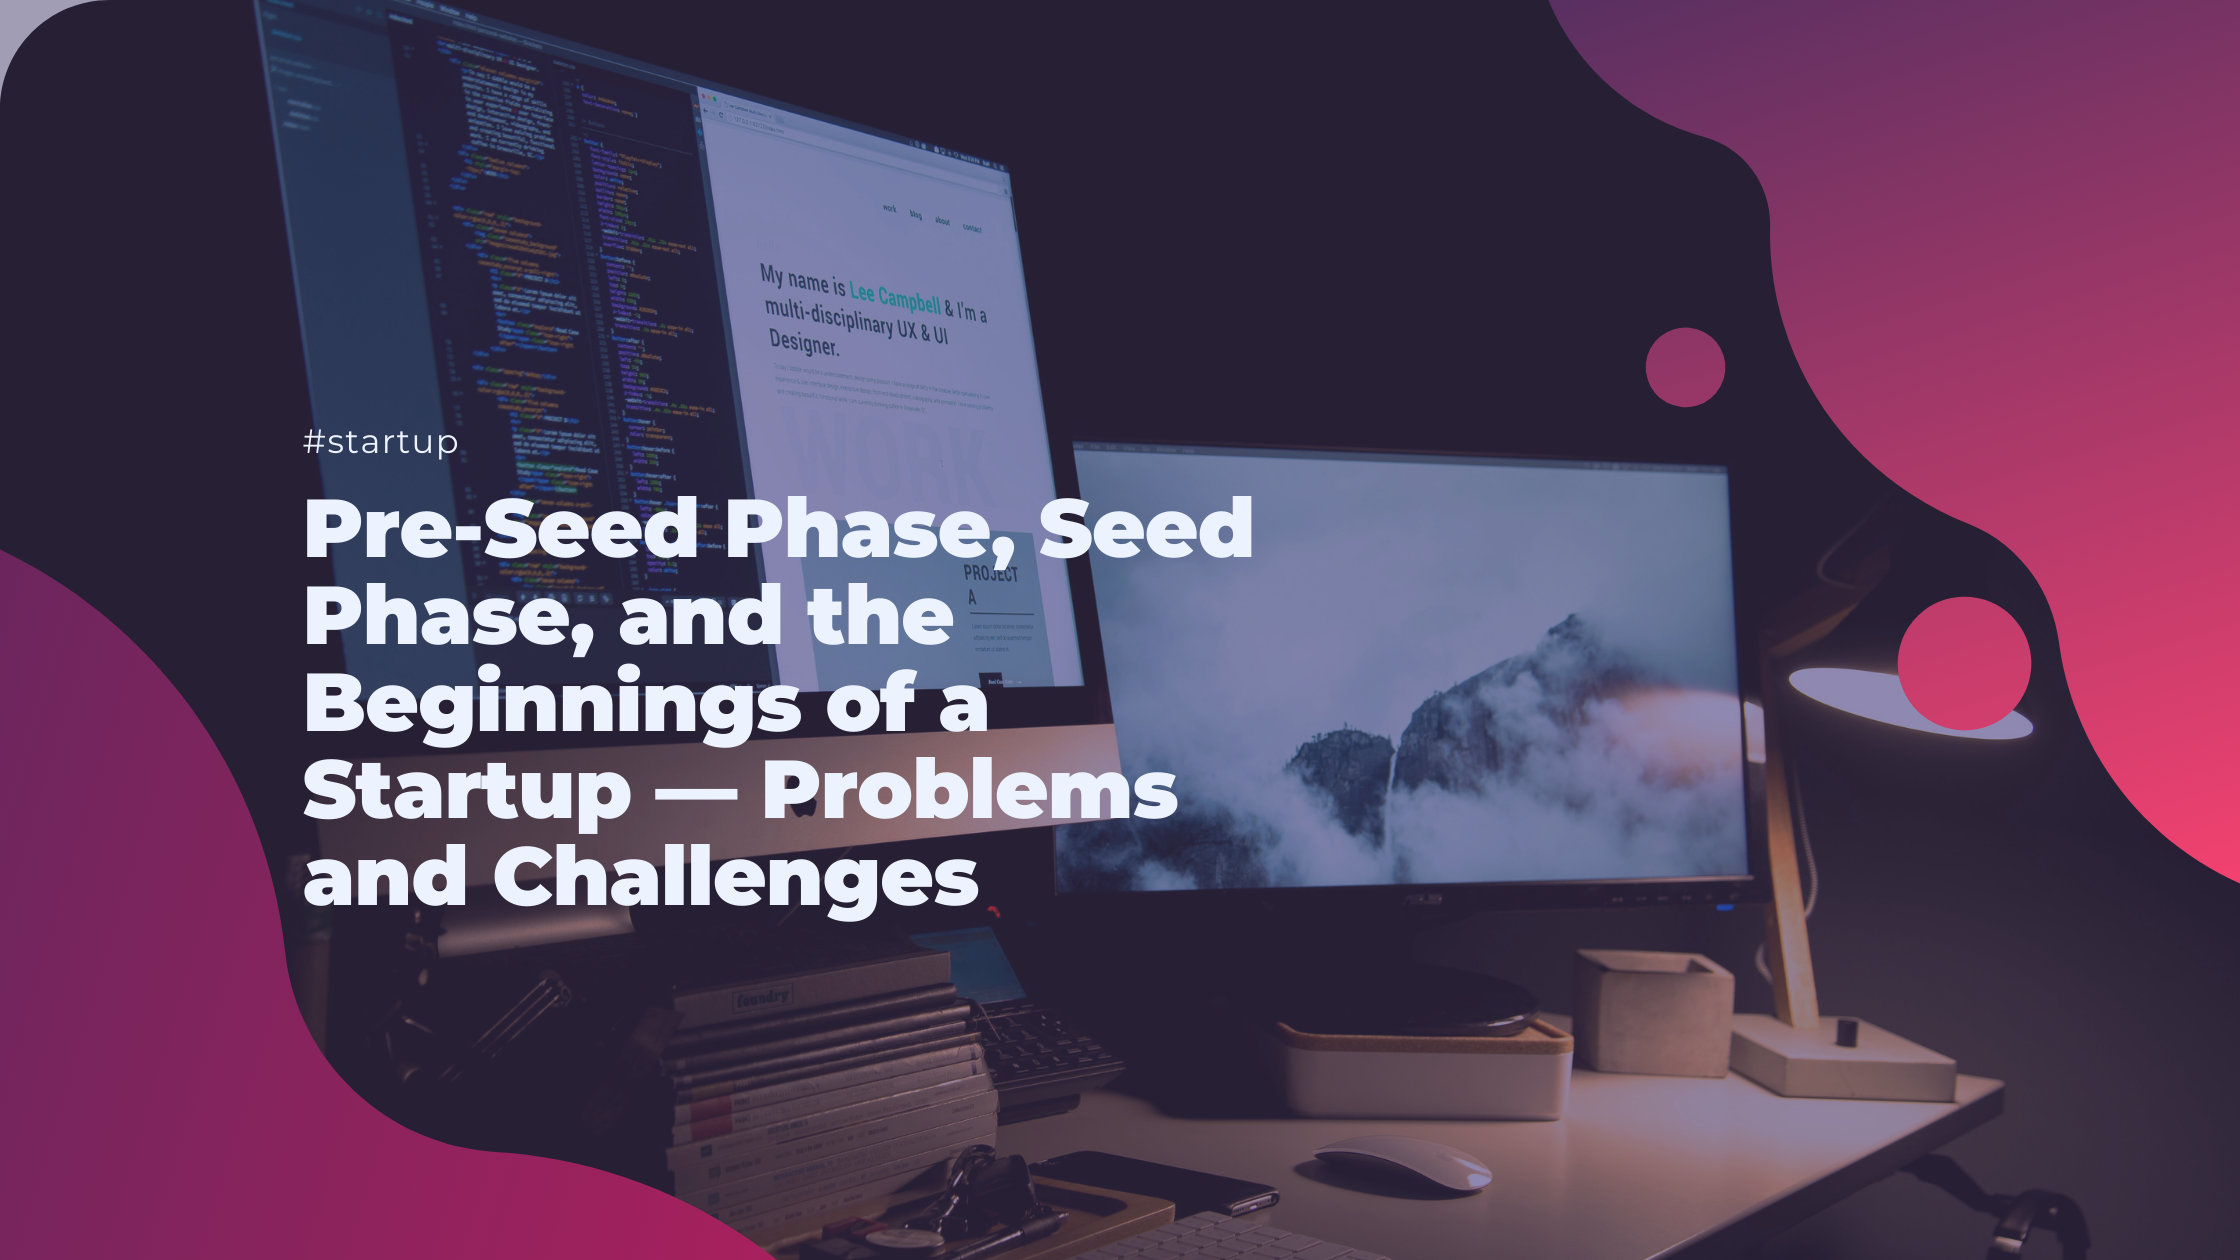 Pre-Seed Phase, Seed Phase, and the Beginnings of a Startup — Problems and Challenges